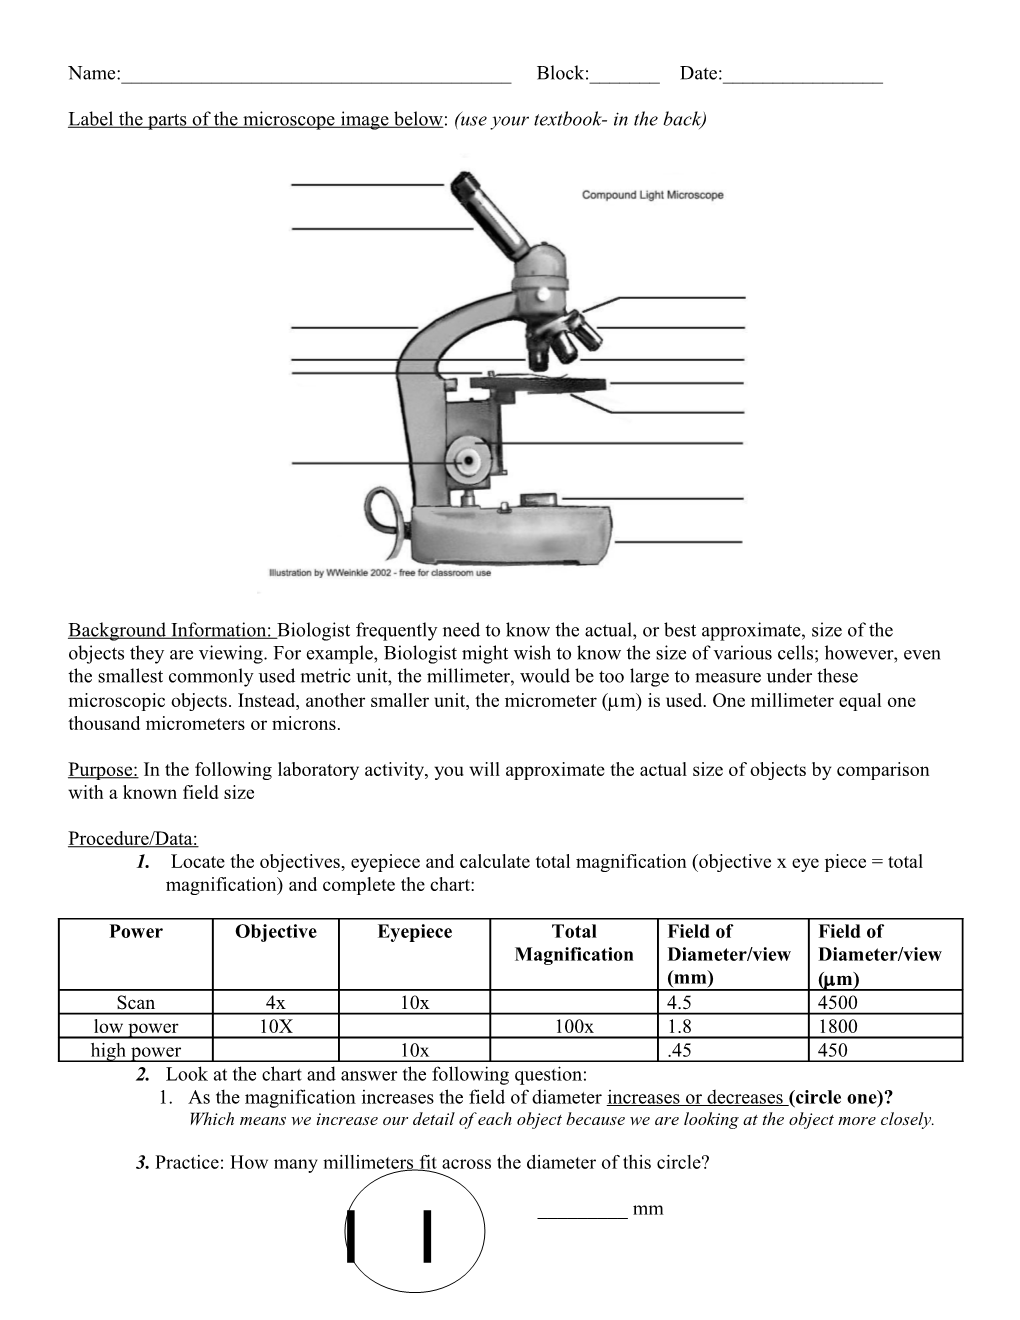 Label the Parts of the Microscope Image Below